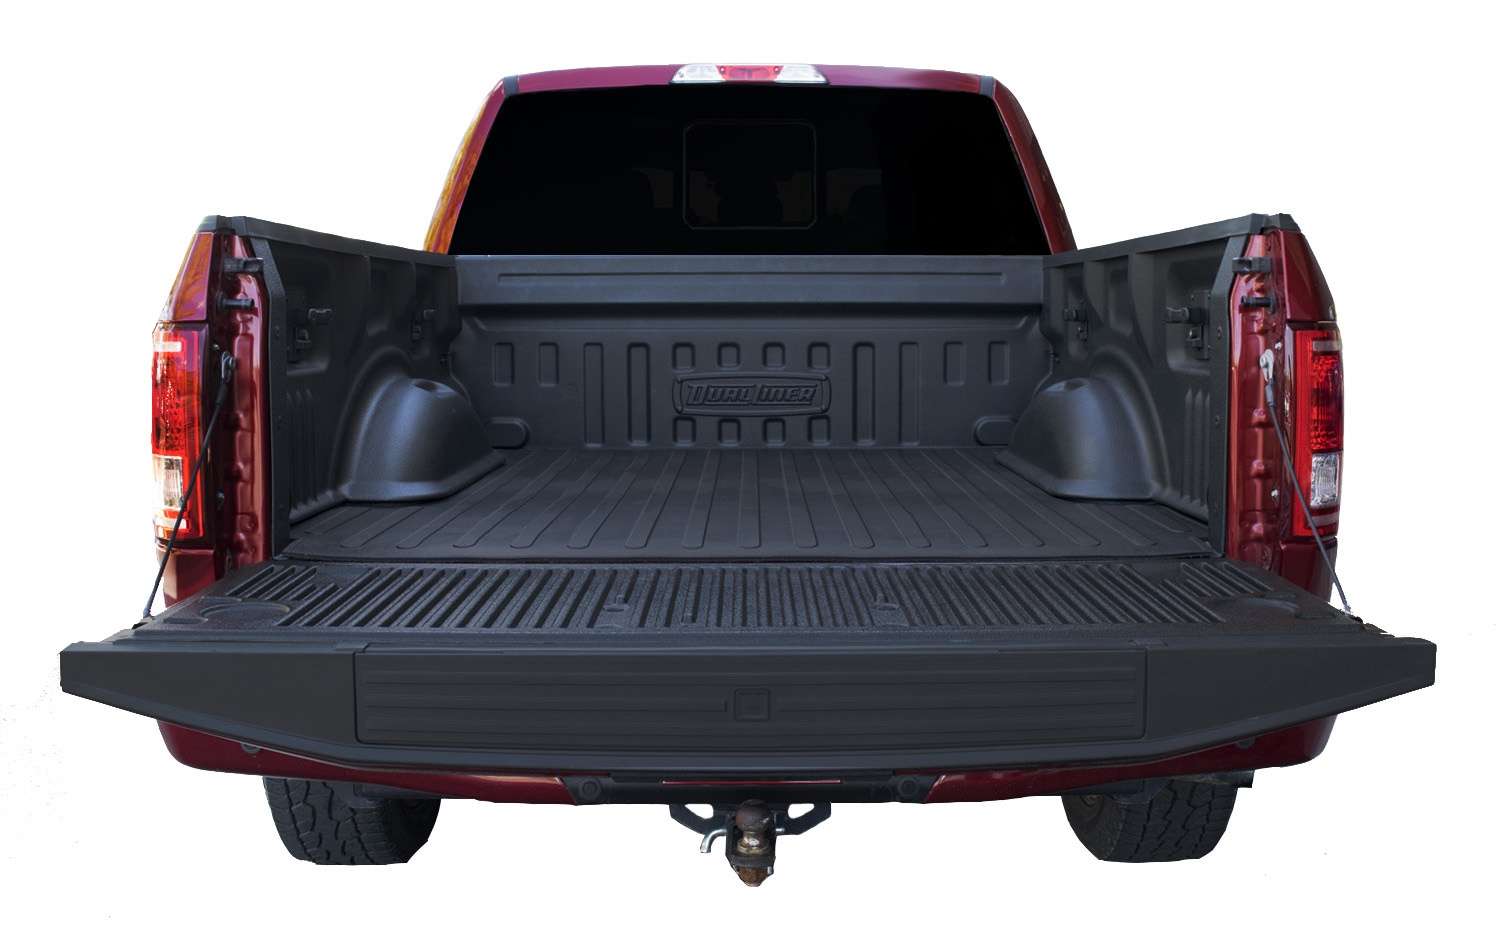 2021 - 2023 Ford F150 Standard 6 Ft 6 Inch Truck Bed Liner